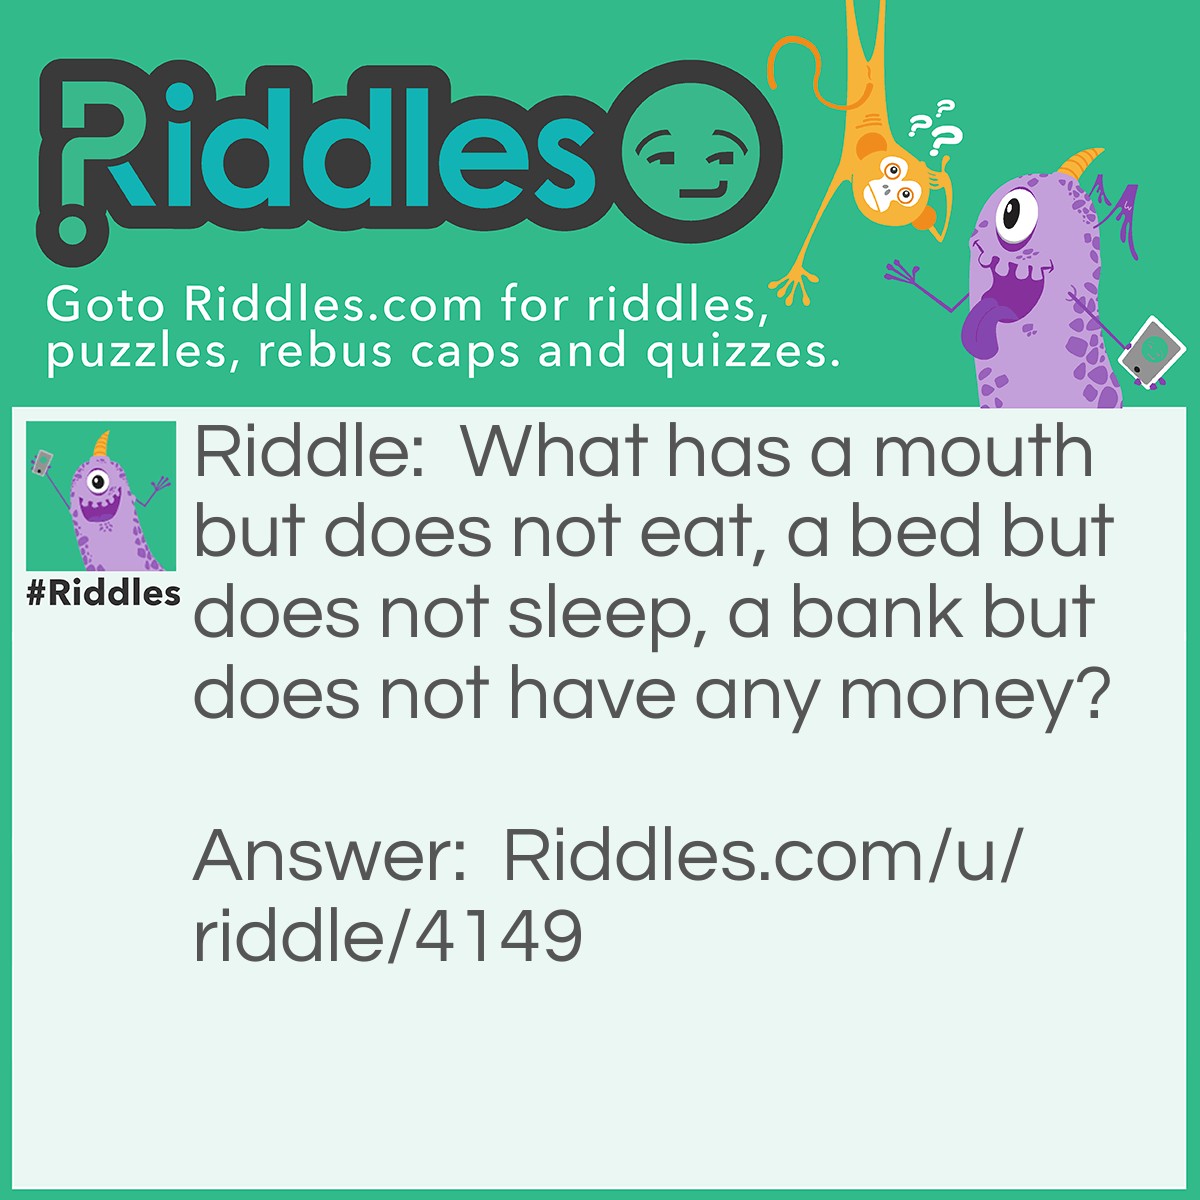 Riddle: What has a mouth but does not eat, a bed but does not sleep, a bank but does not have any money? Answer: A river.